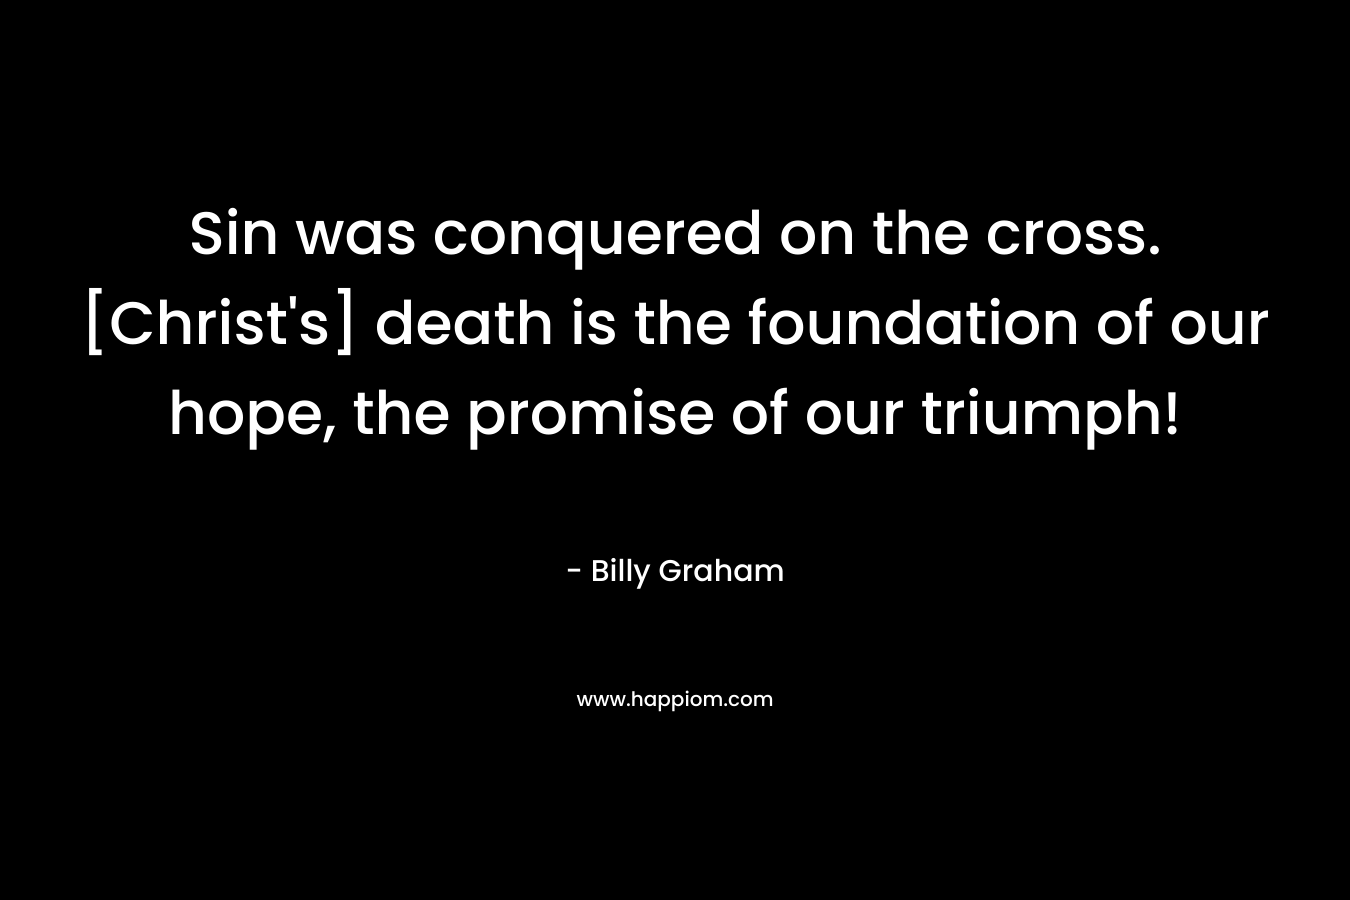 Sin was conquered on the cross. [Christ's] death is the foundation of our hope, the promise of our triumph!